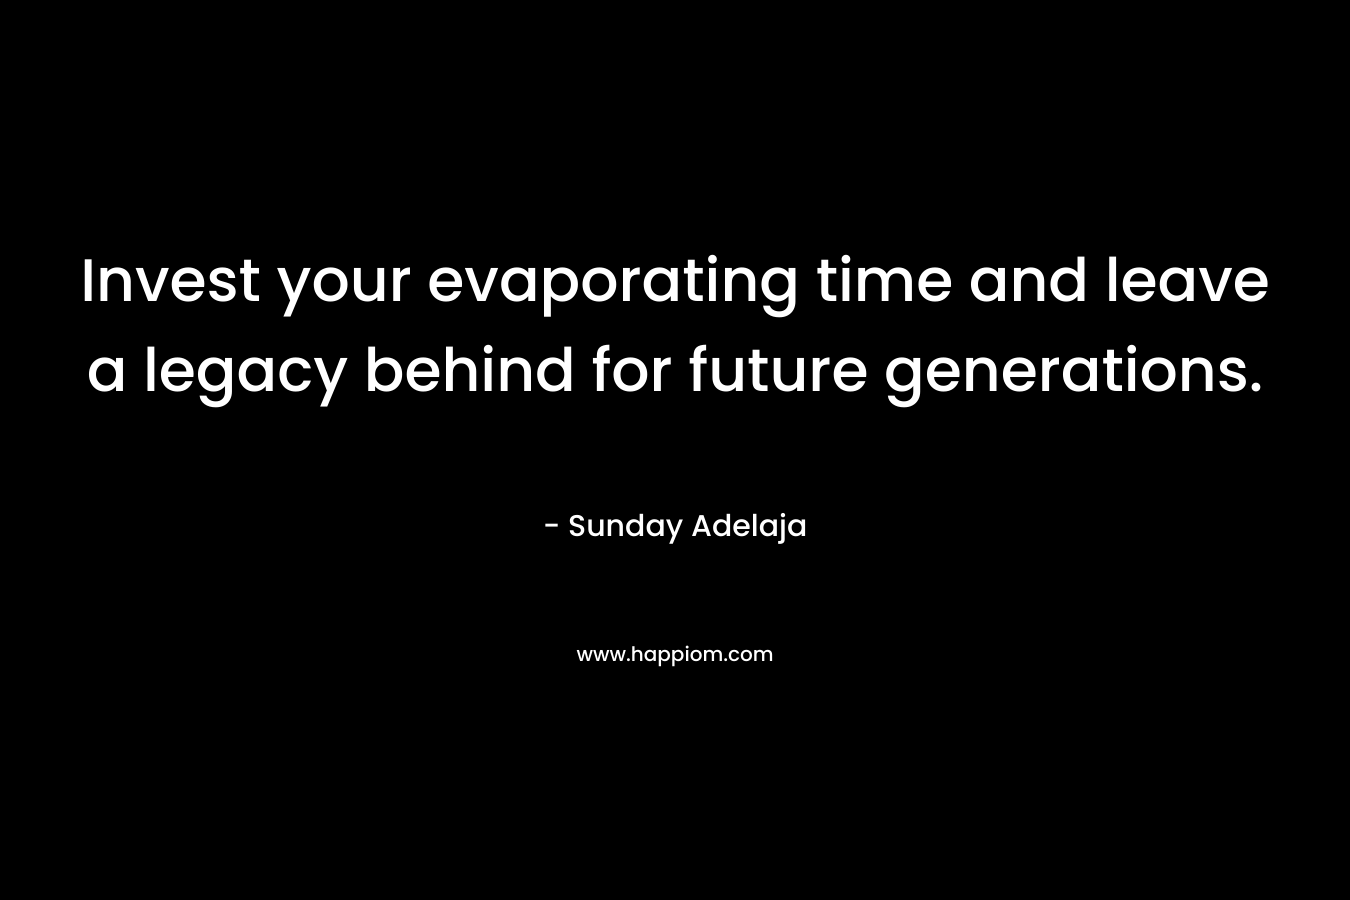 Invest your evaporating time and leave a legacy behind for future generations.